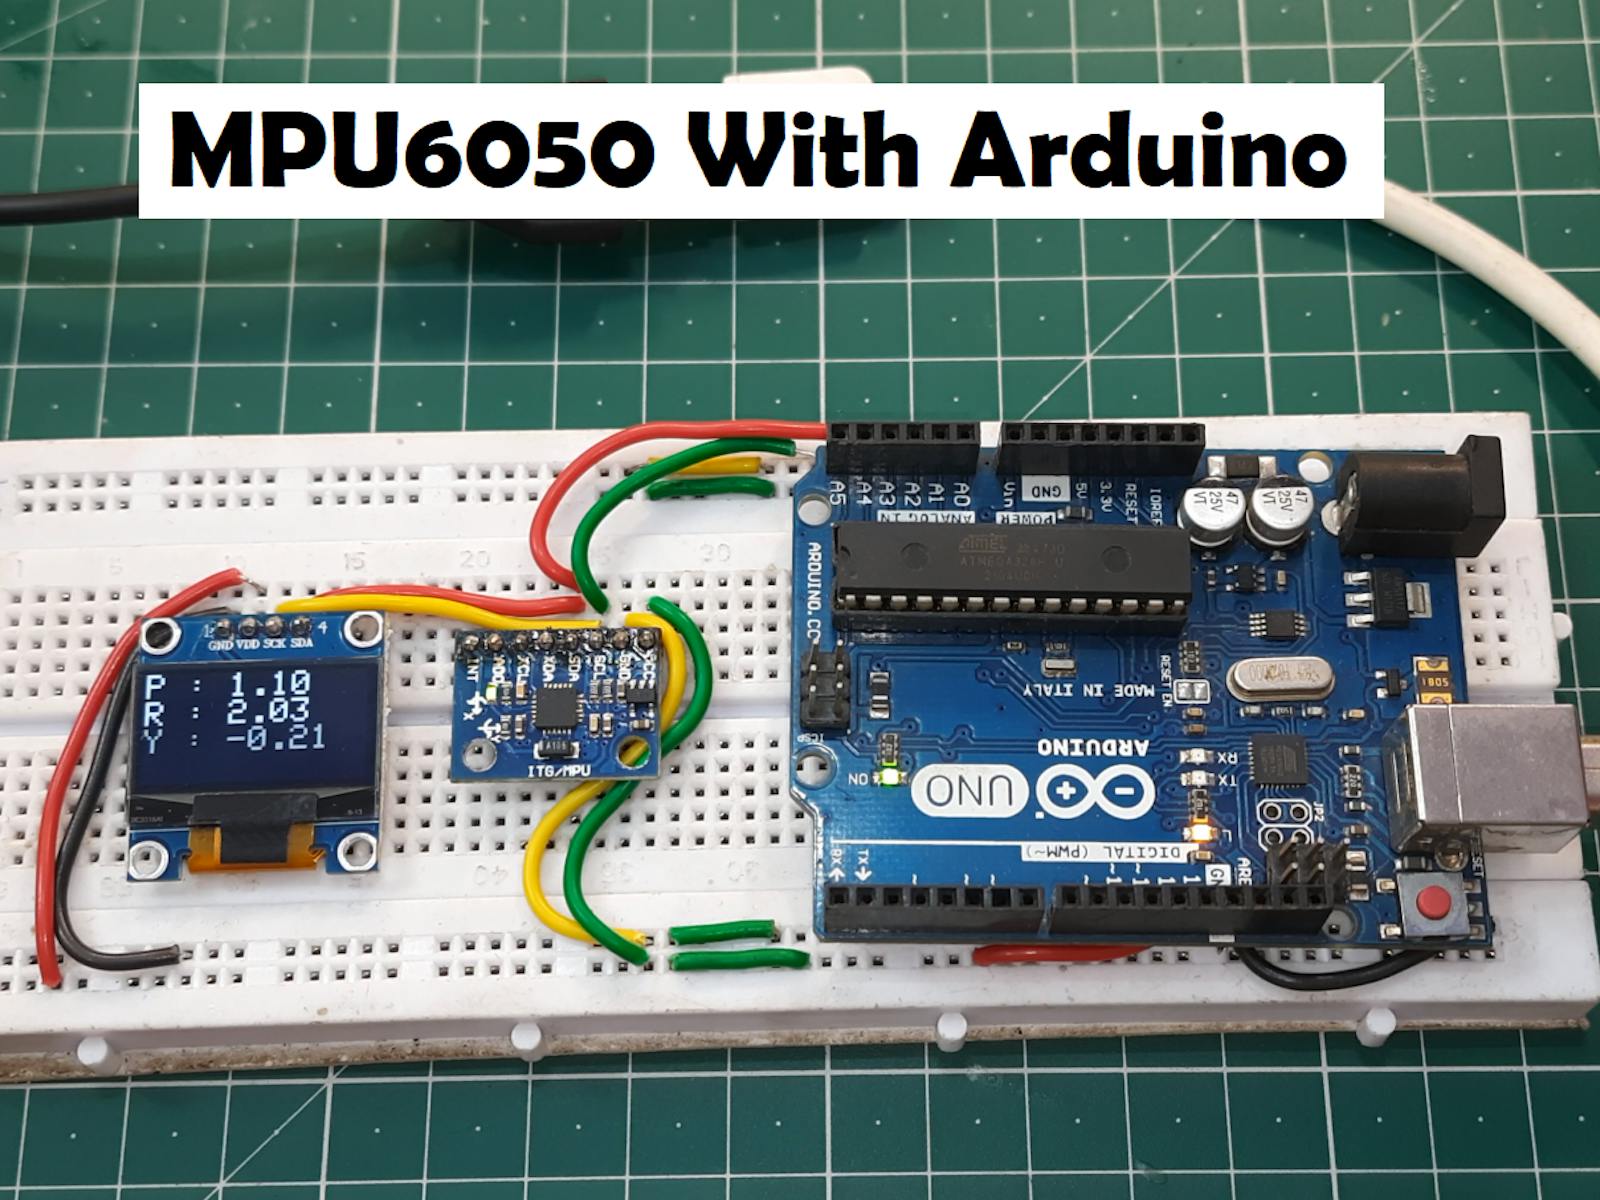 MPU6050 with Arduino - Display Gyro and Accelerometer values on OLED